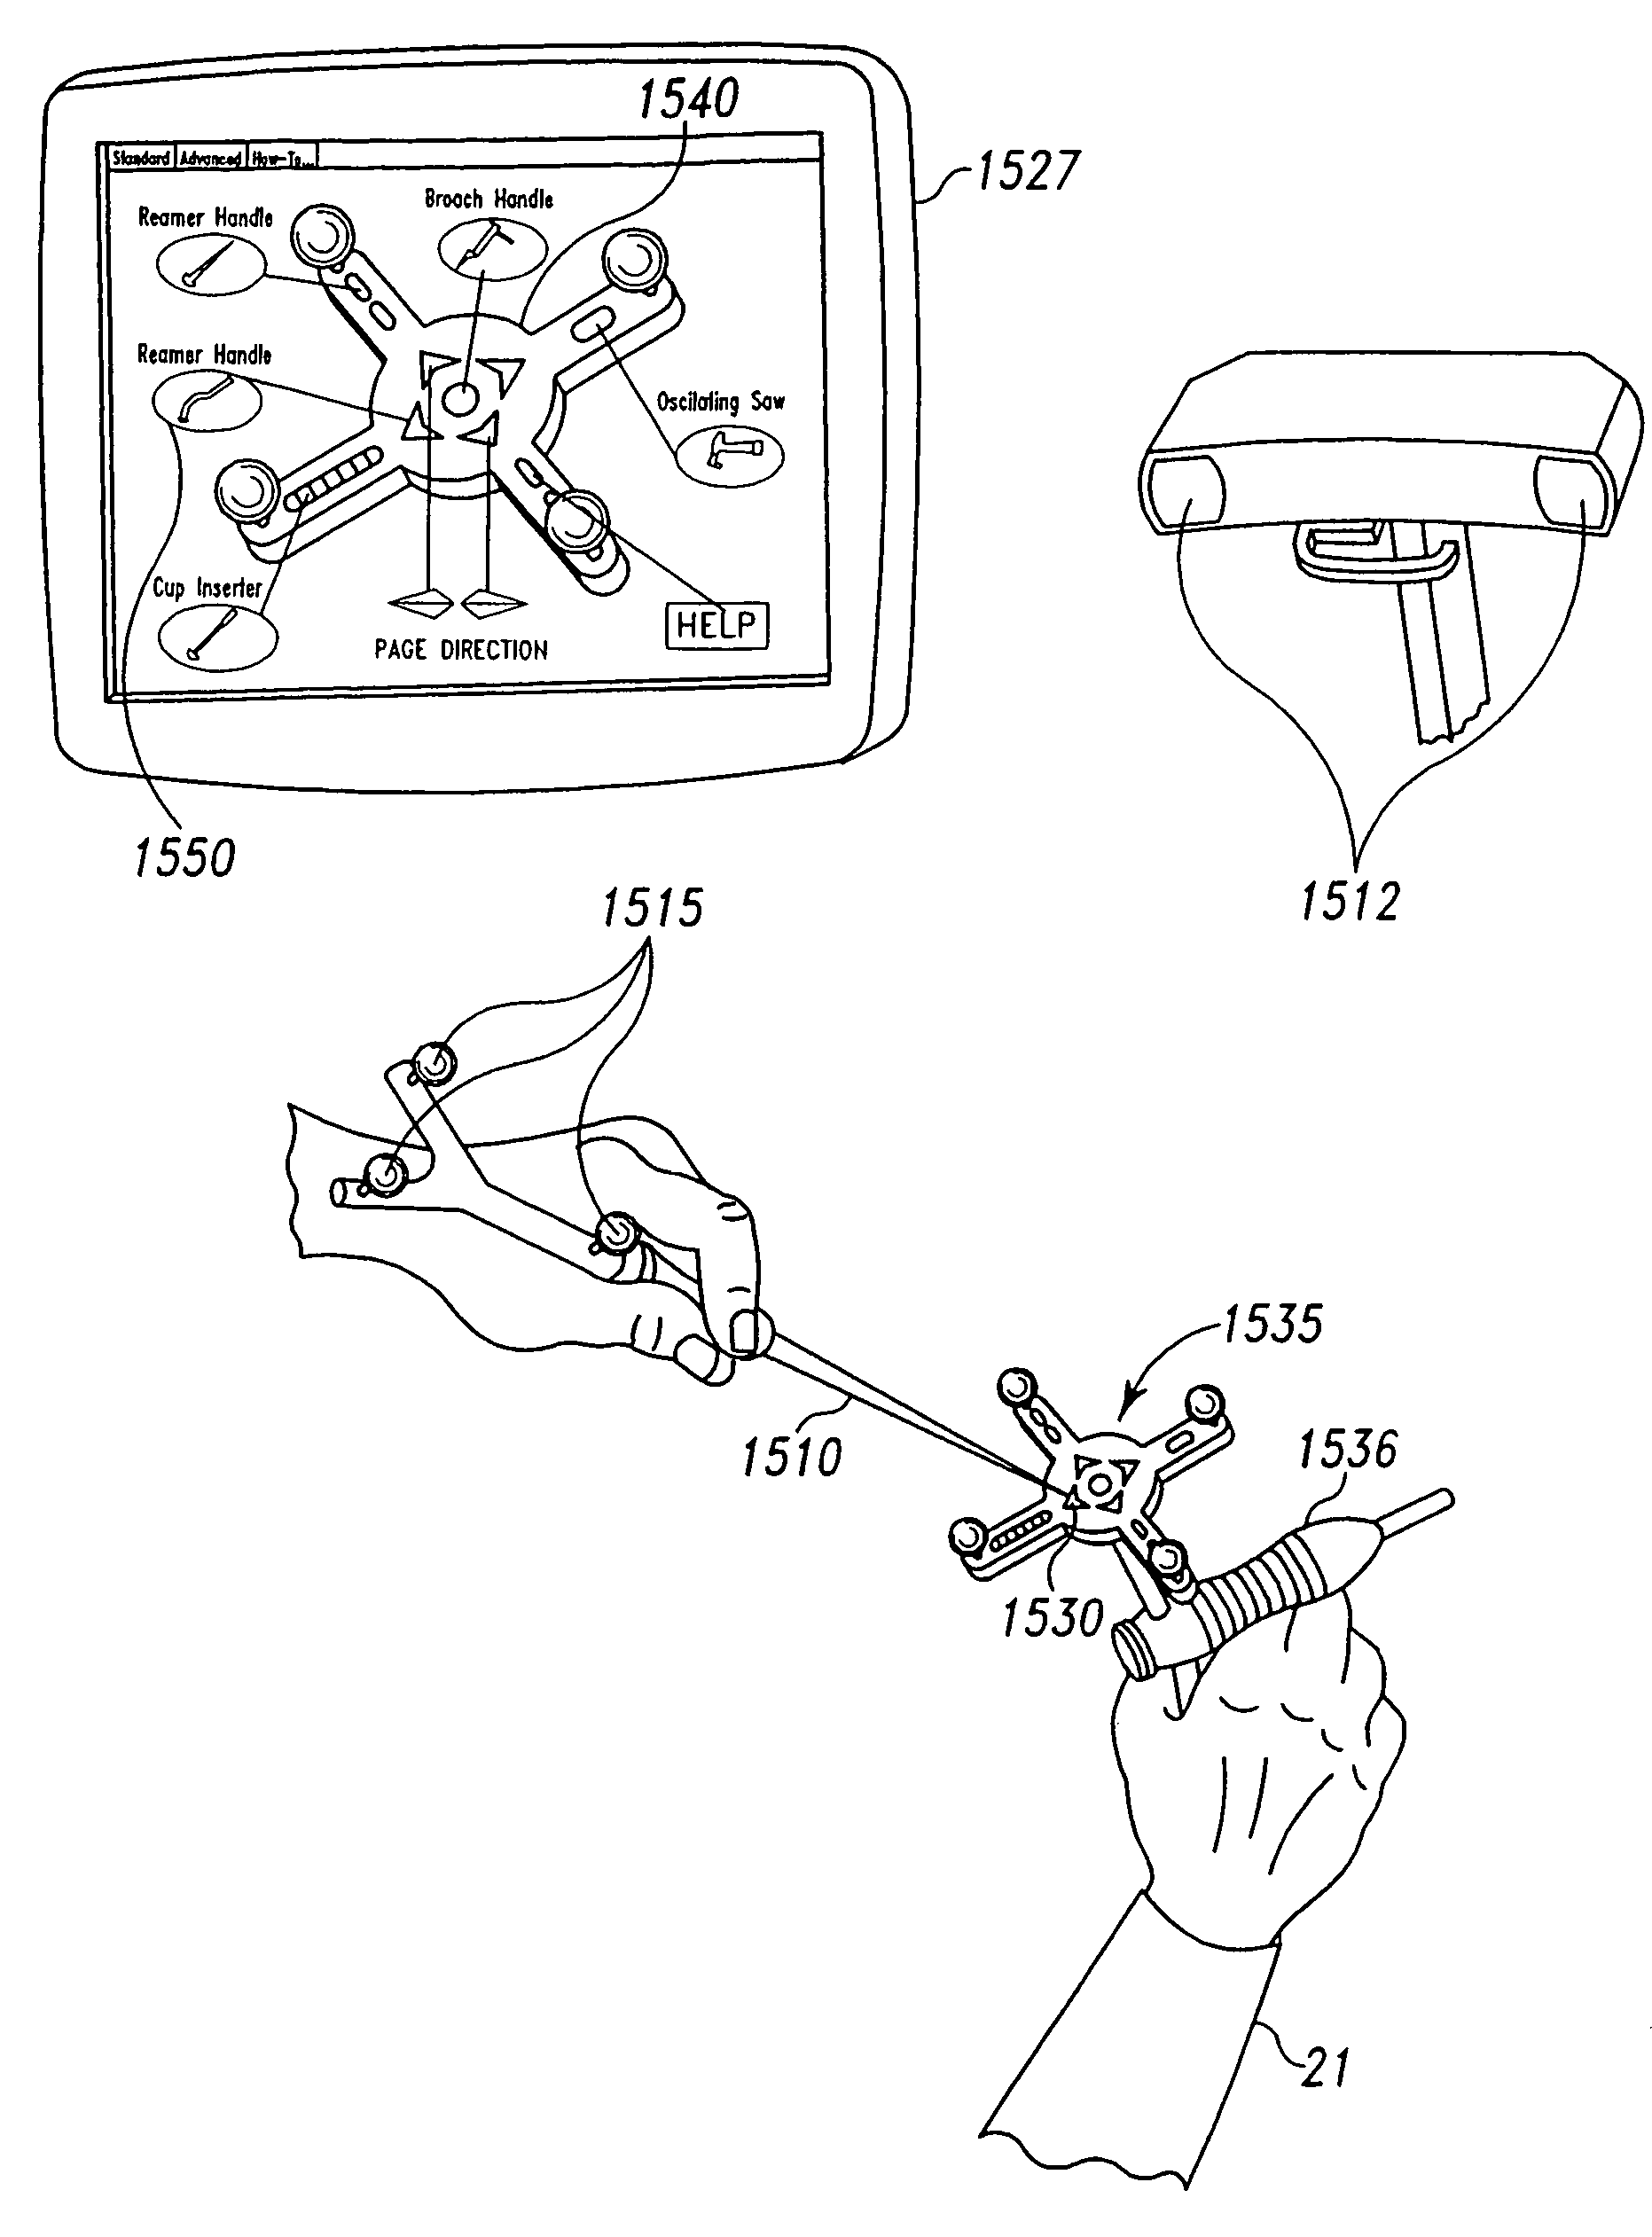 Virtual mouse for use in surgical navigation